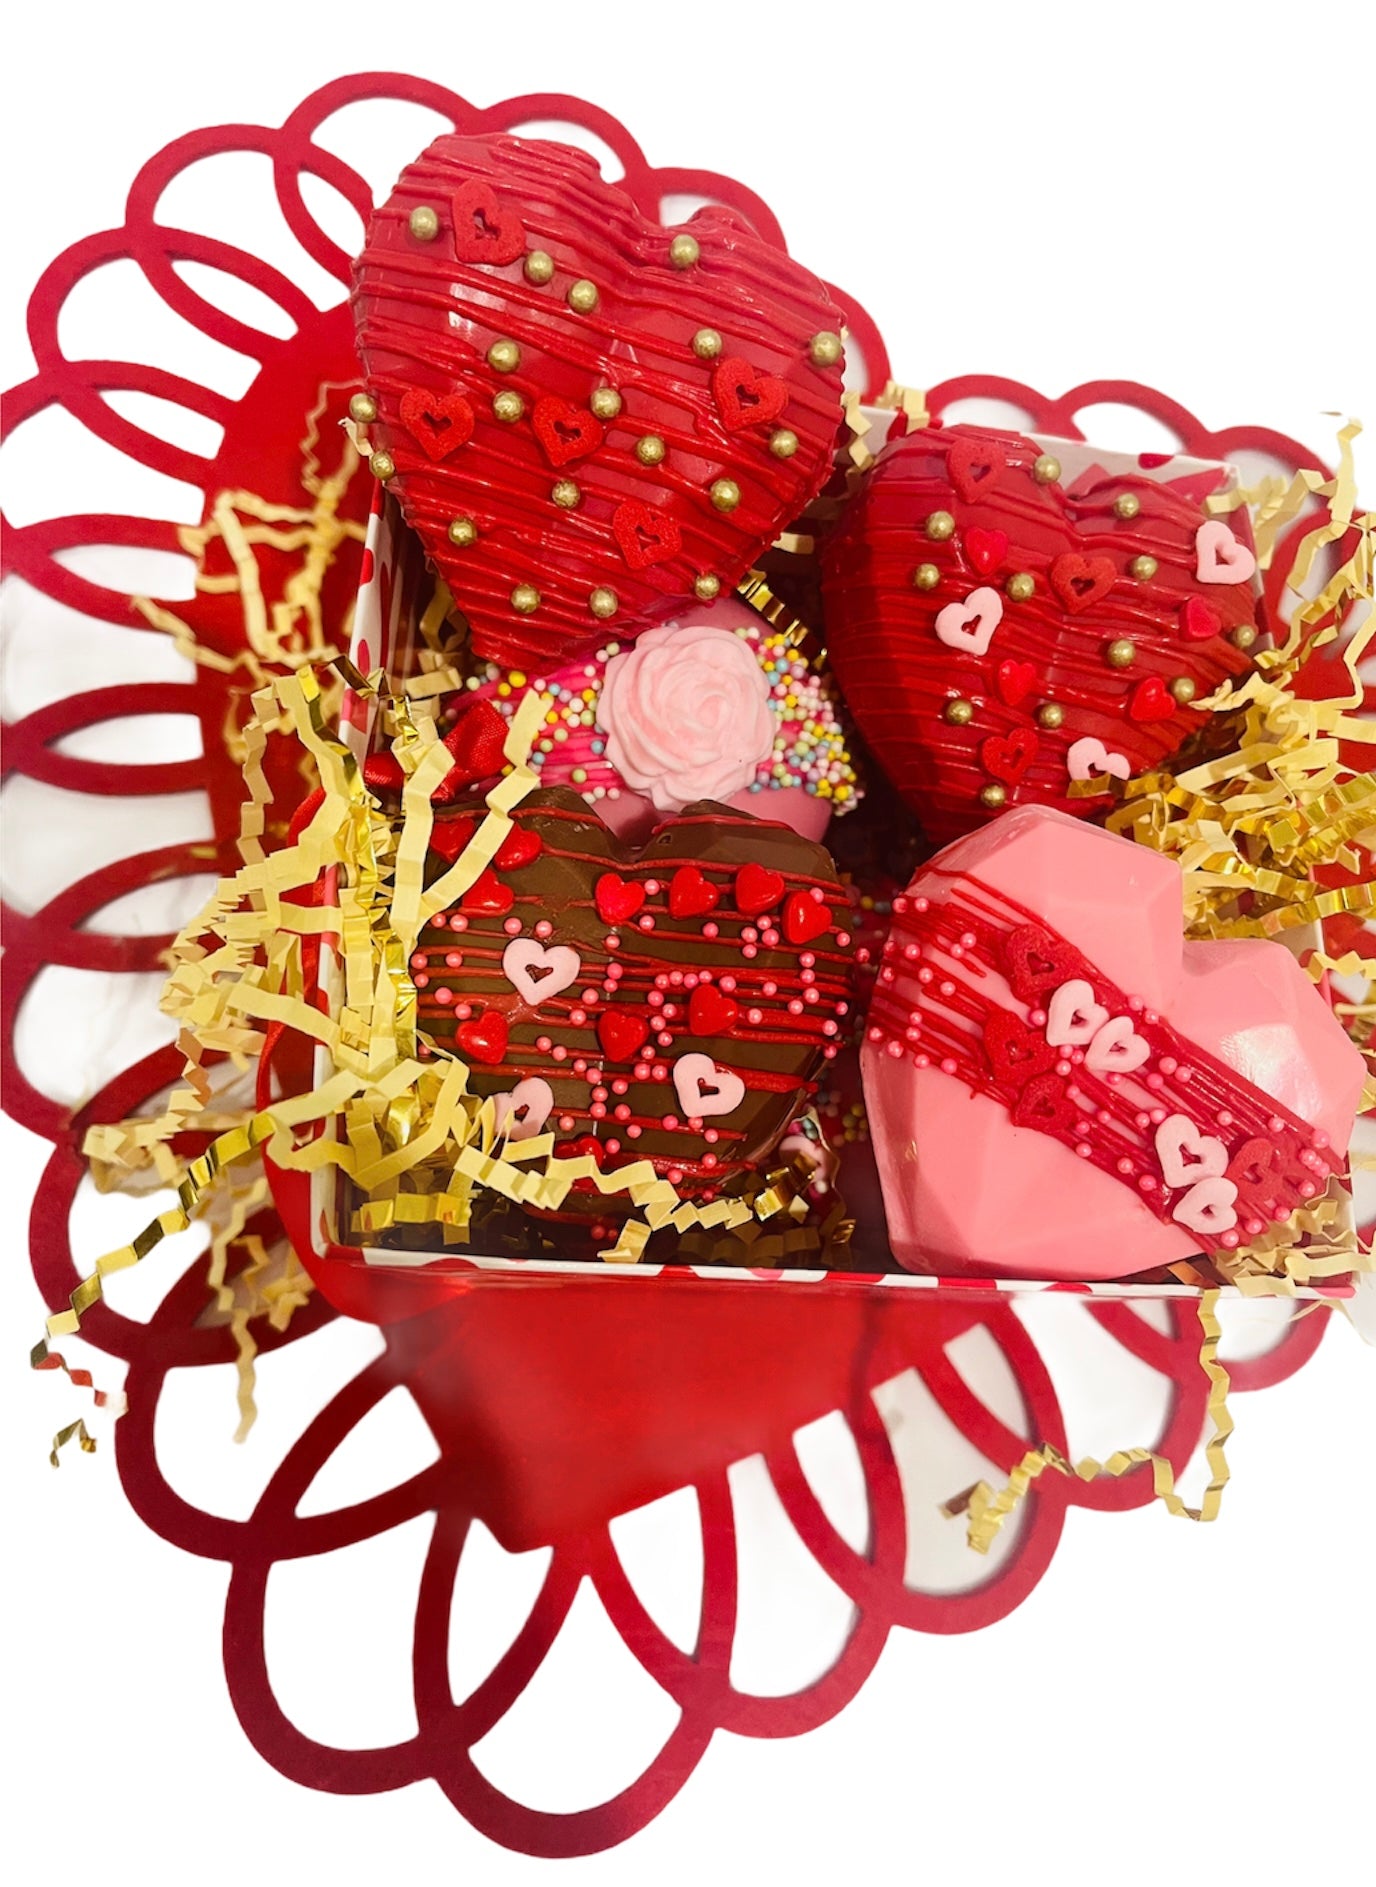 valentine's hot cocoa bombs, chocolate bombs, valenine sweet treats, best gift for valentines